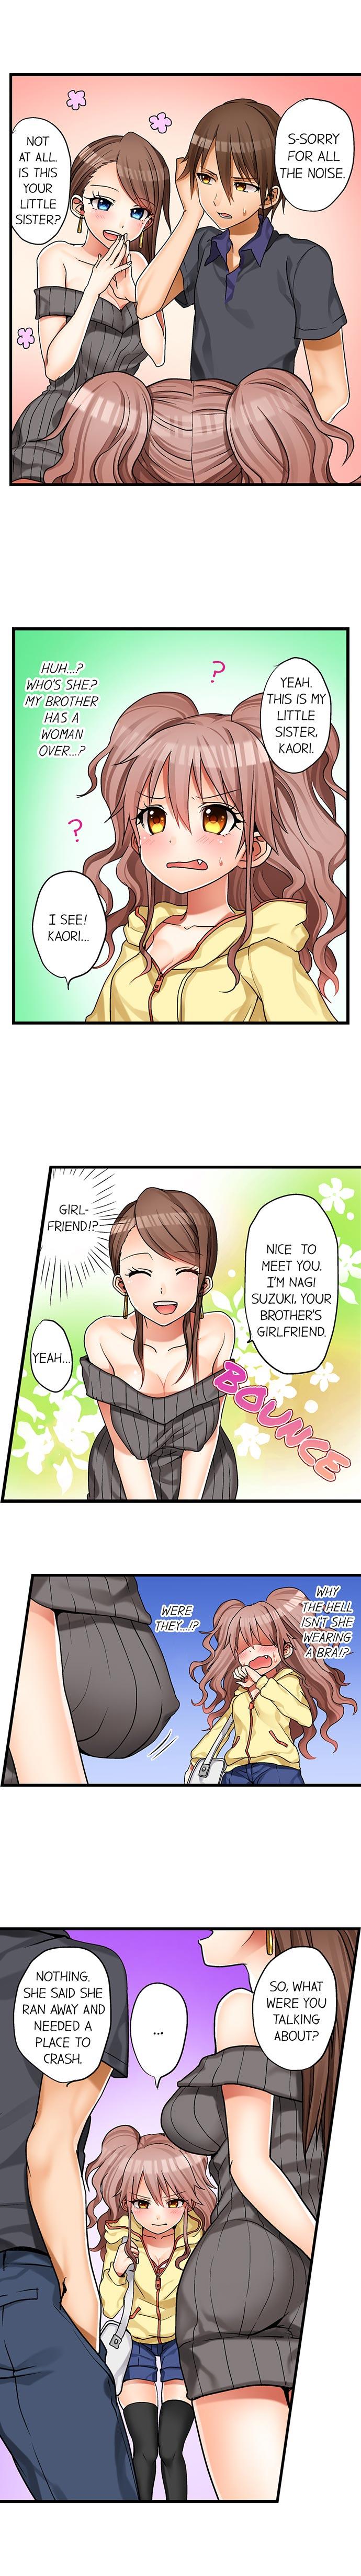 Rub Hatsuecchi no Aite wa... Imouto! My First Time is with.... My Little Sister ! Ametuer Porn - Page 9